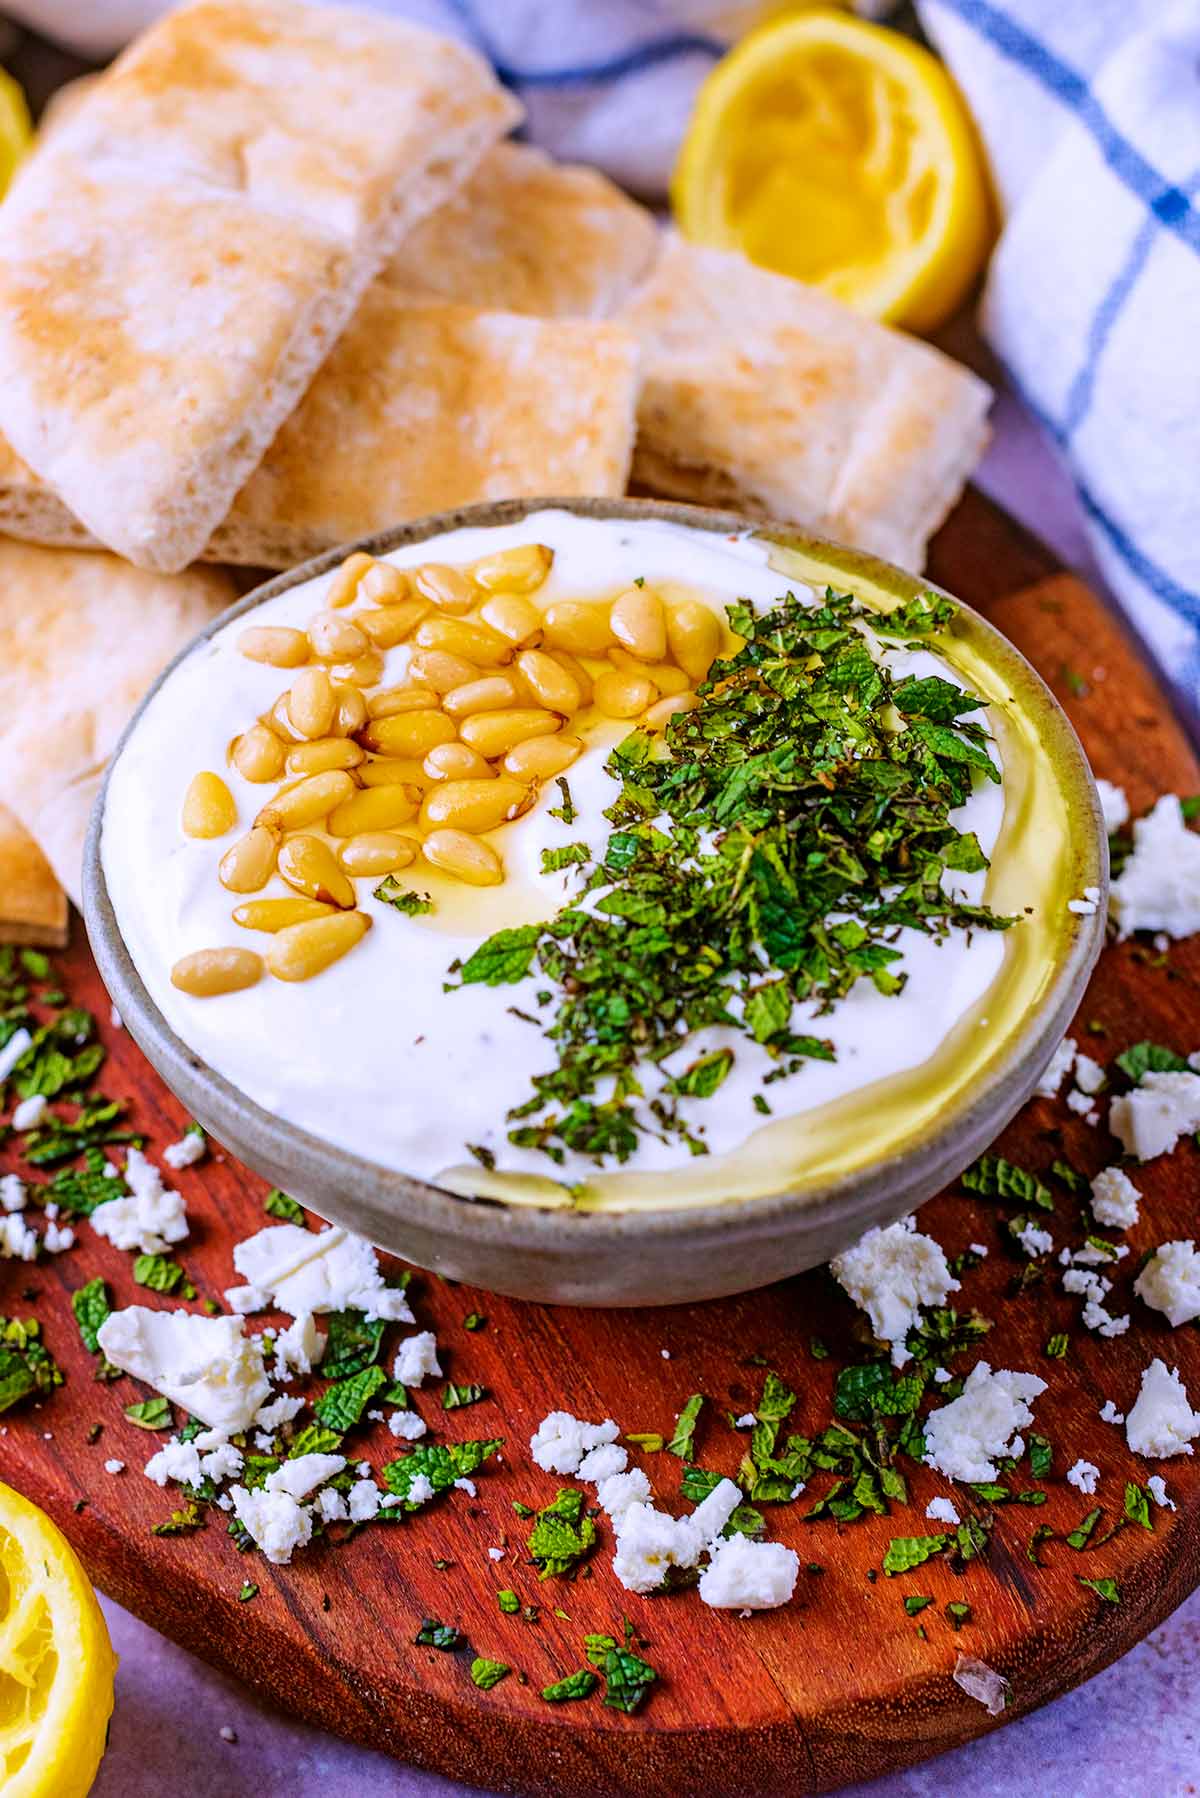 A bowl of feta dip in front of some sliced pita breads.